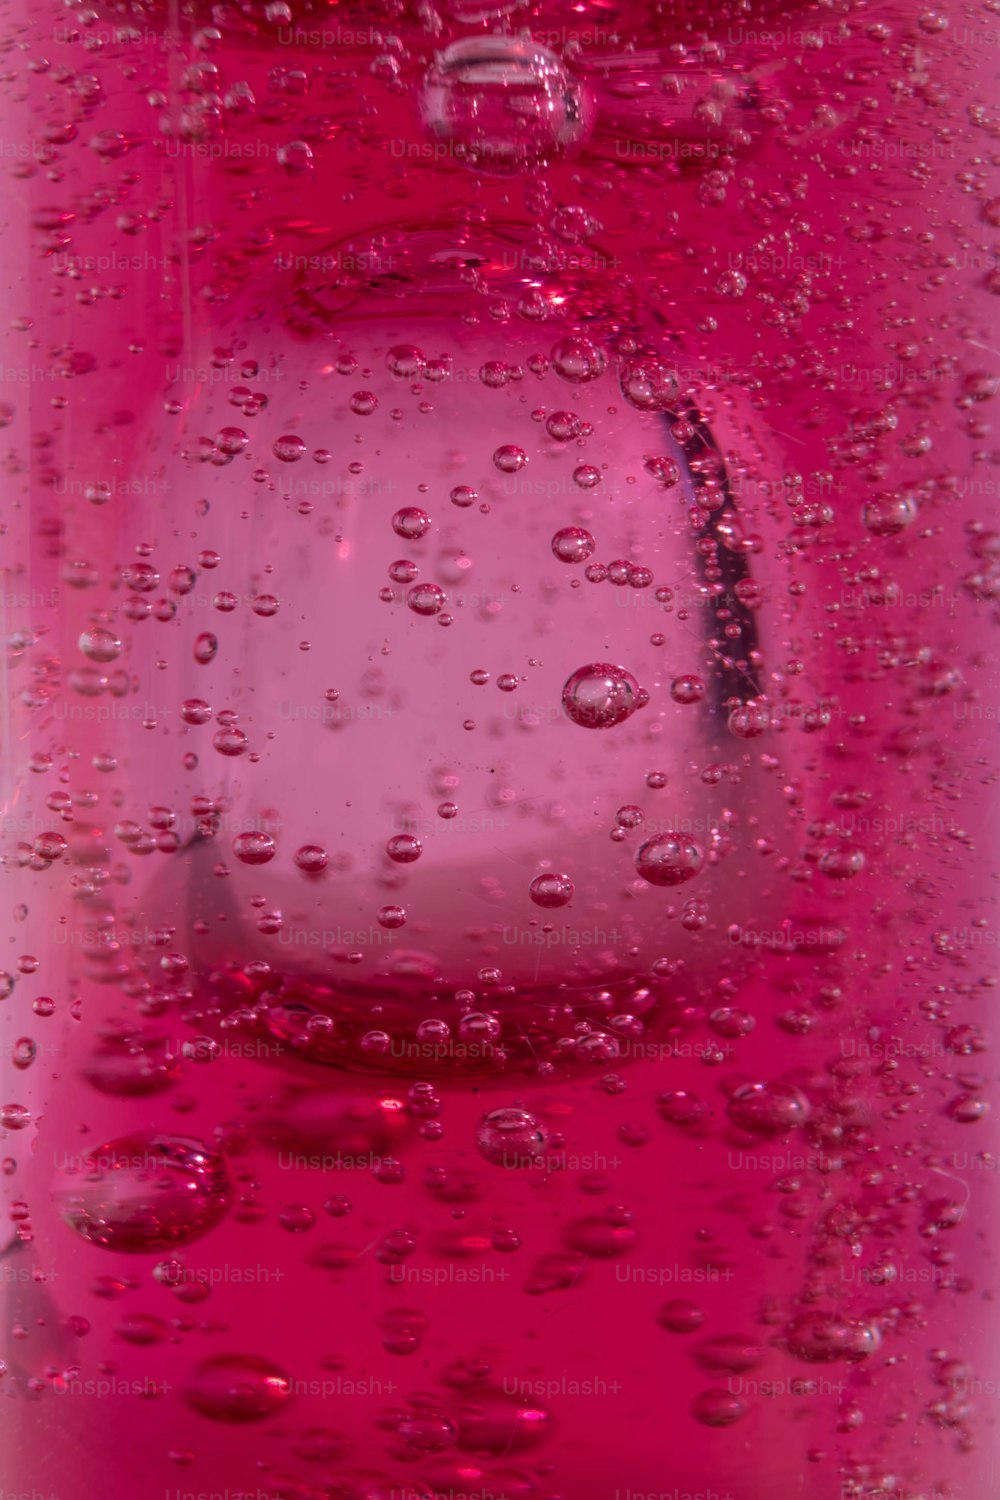 a close up of a bottle of water with drops of water on it